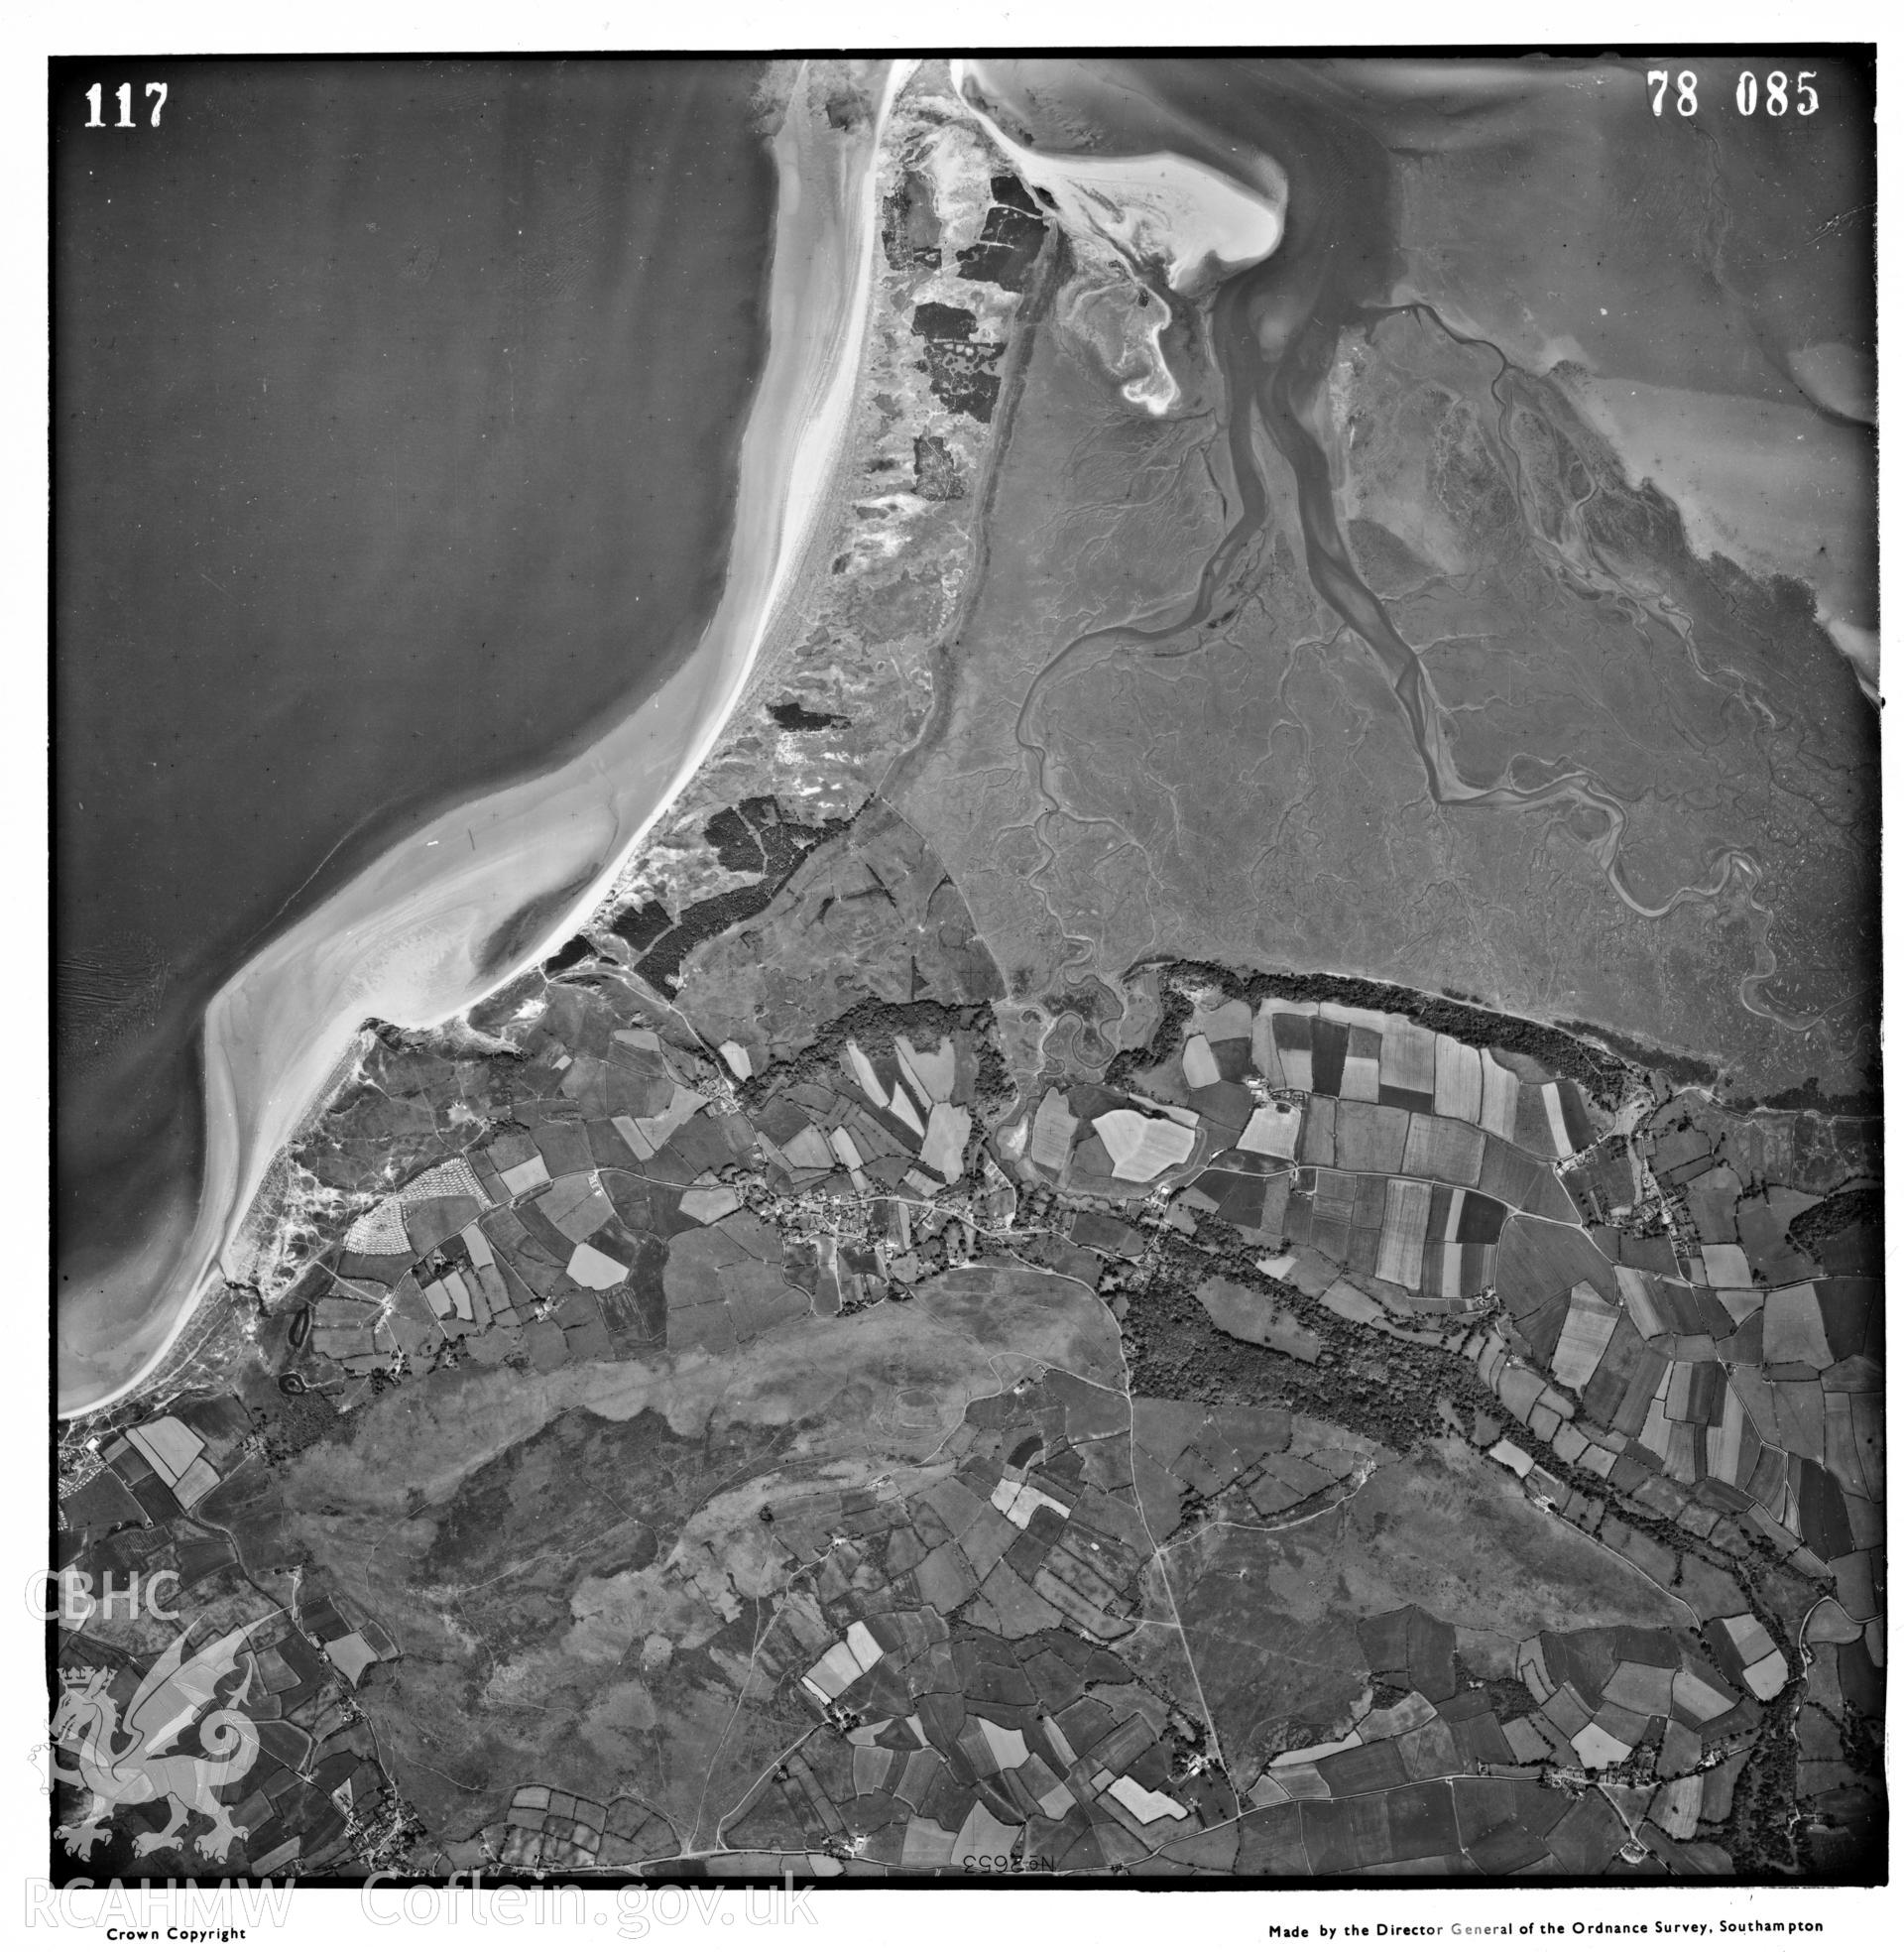 Digitized copy of an aerial photograph showing the Landimore area, taken by Ordnance Survey, 1978.